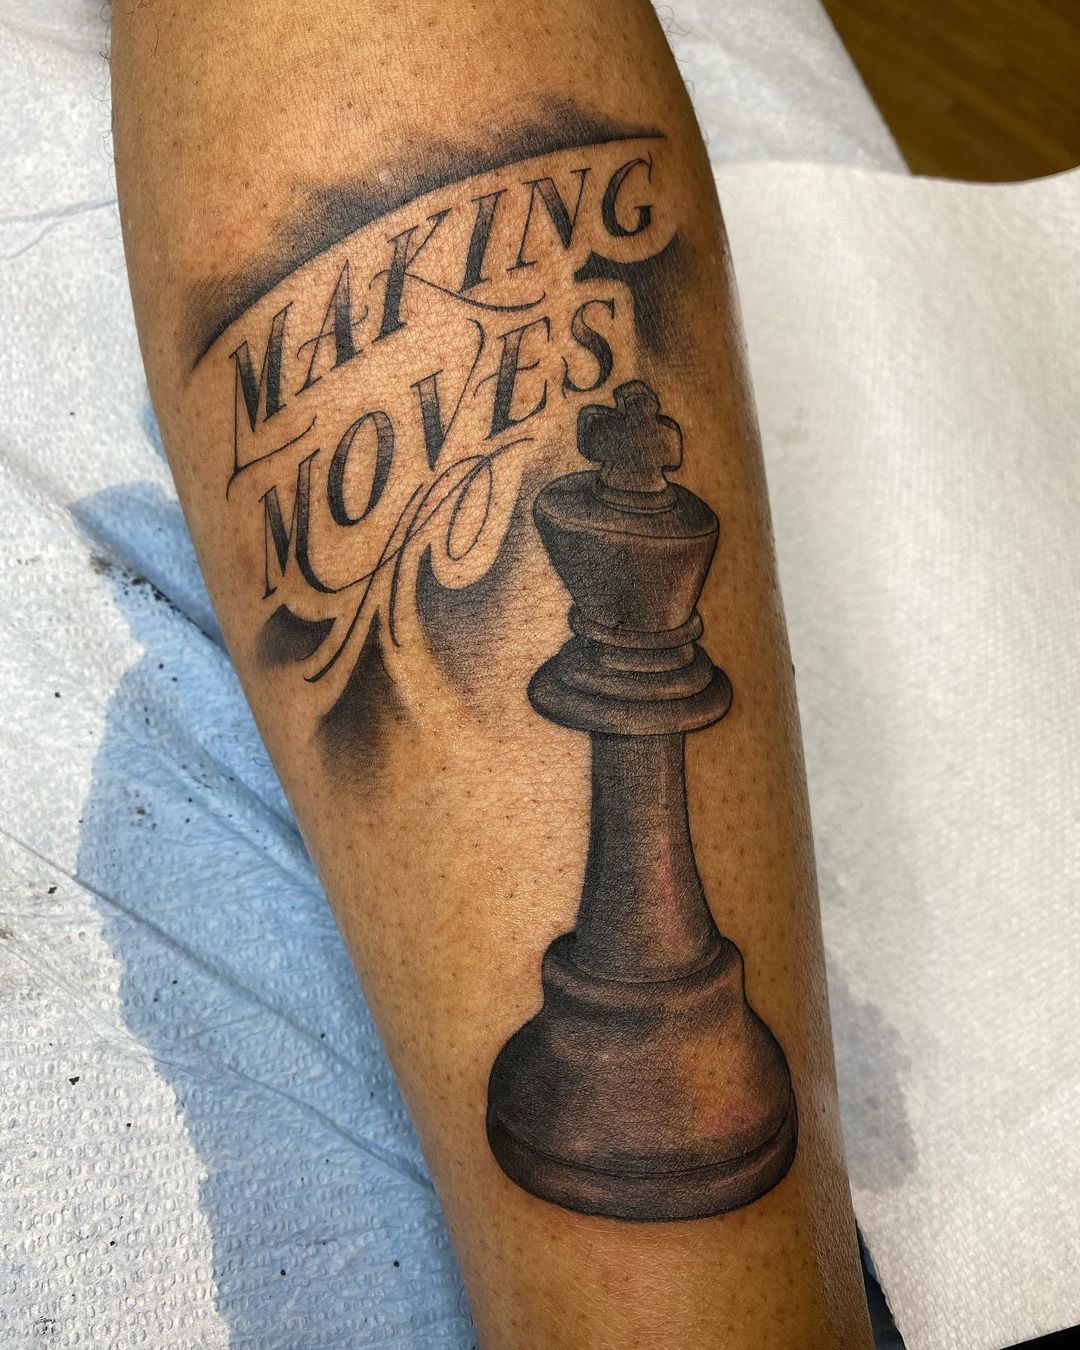 Micro-realistic chess king tattoo on the inner forearm.